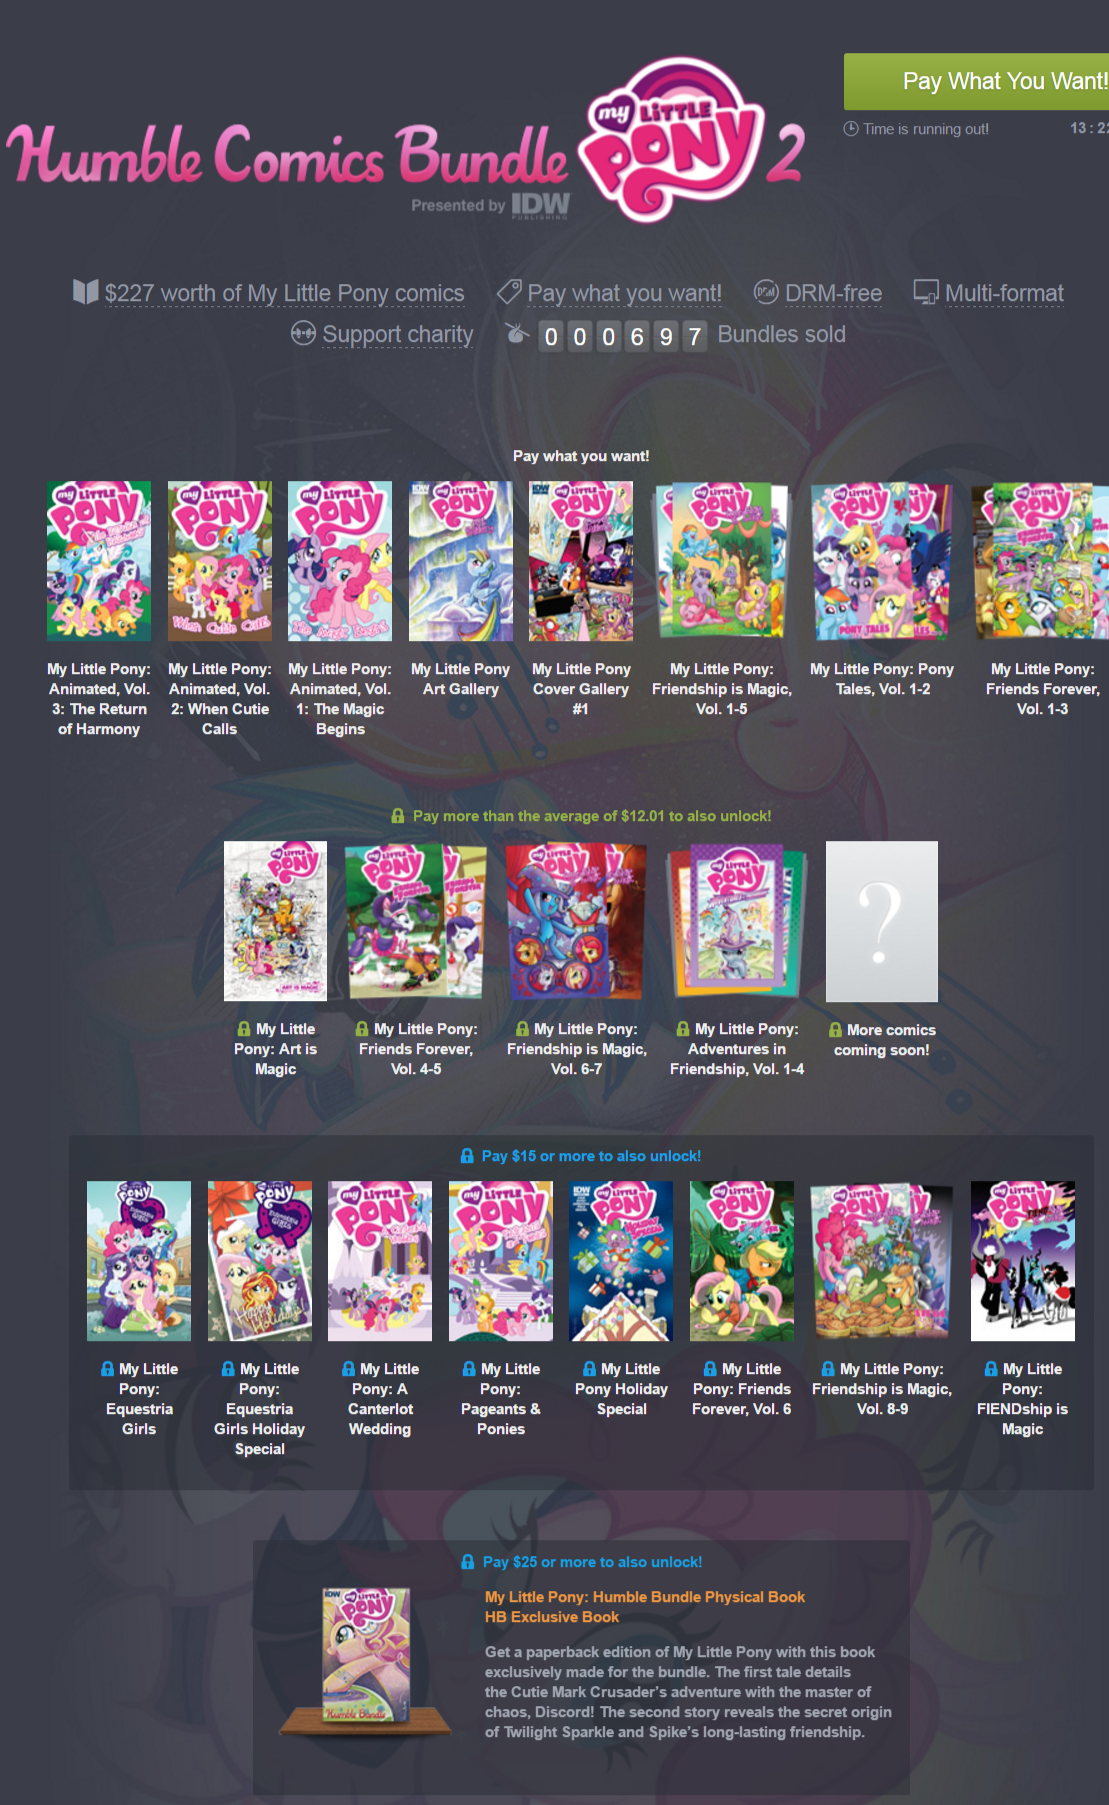 Humble Comics Bundle  My Little Pony 2 presented by IDW  pay what you want and help charity .png